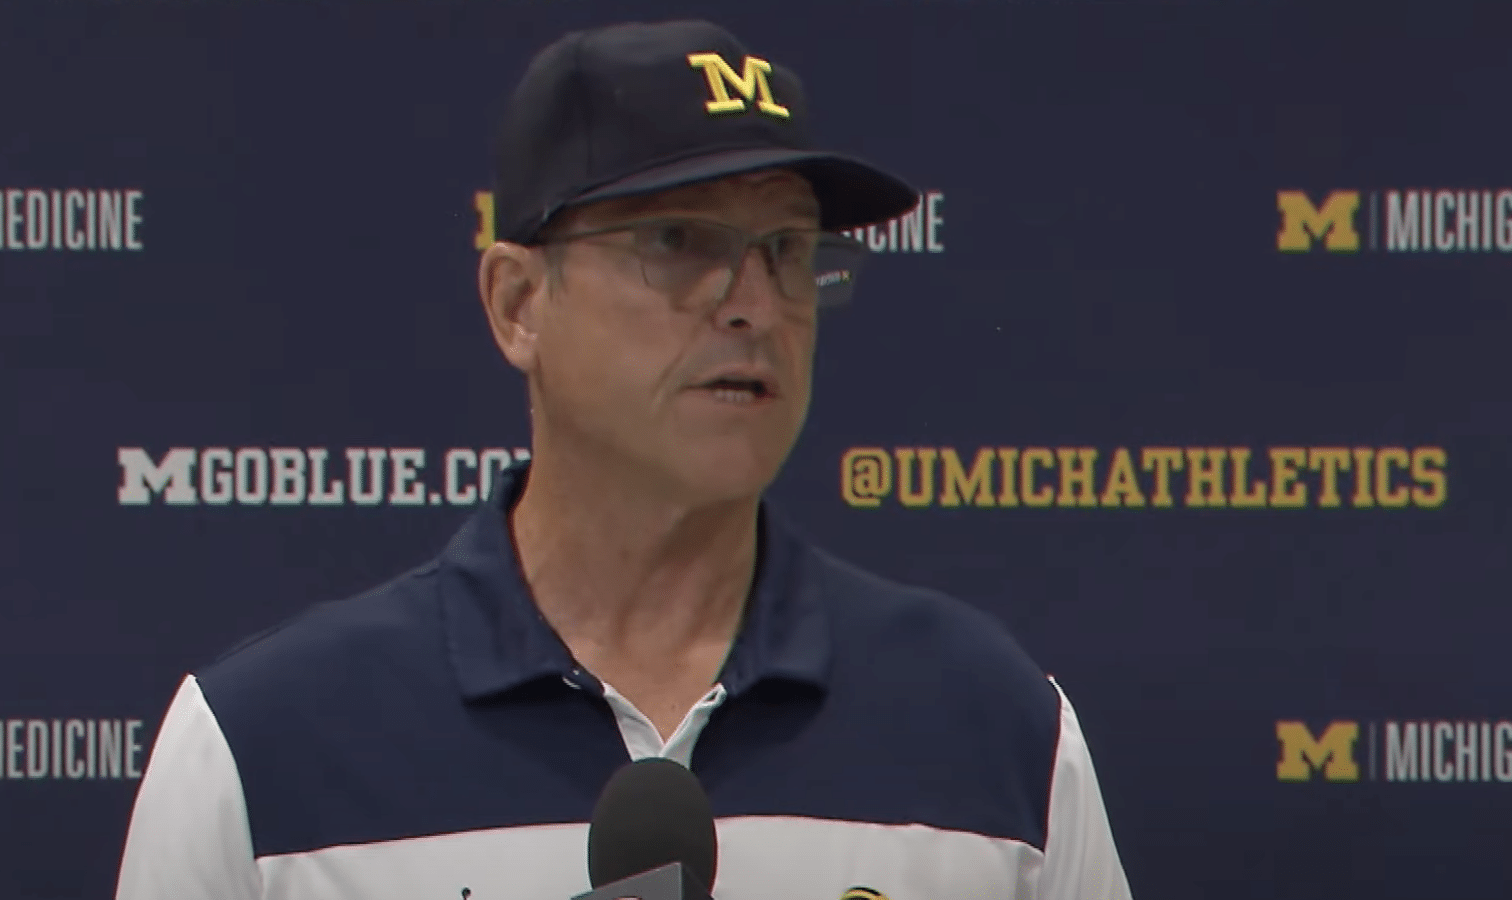 Michigan Football Coach Jim Harbaugh weighs in on suspension Jim Harbaugh responds to question about Mel Tucker